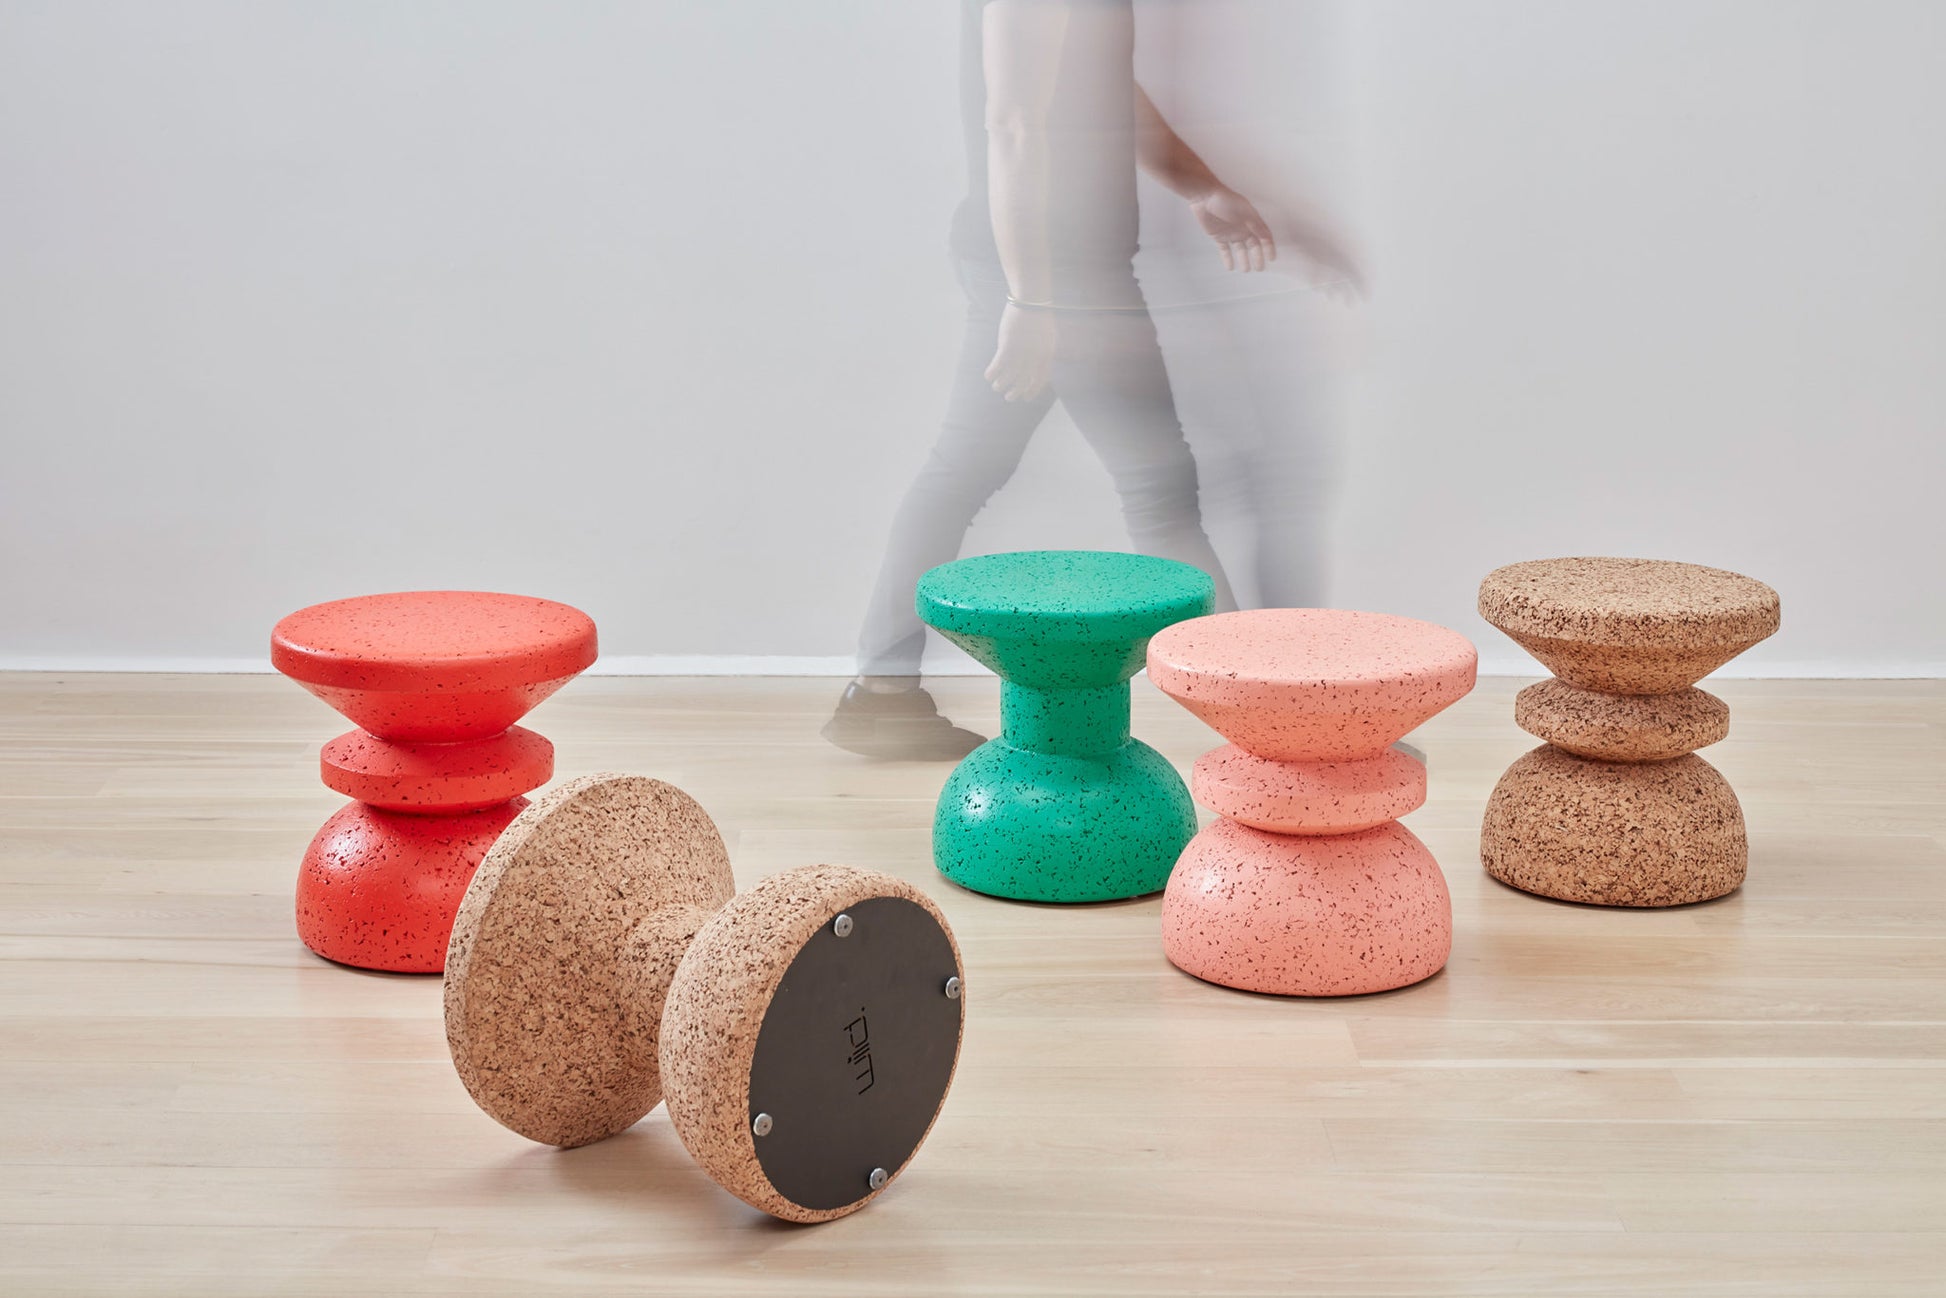 Vibrant collection of Kanju Wiid Design African Cork Stools in an array of colors: bold red, soft pink, serene teal, and natural cork. Each stool showcases the exquisite craftsmanship and sustainable design, adding a pop of color and eco-friendly elegance to any space